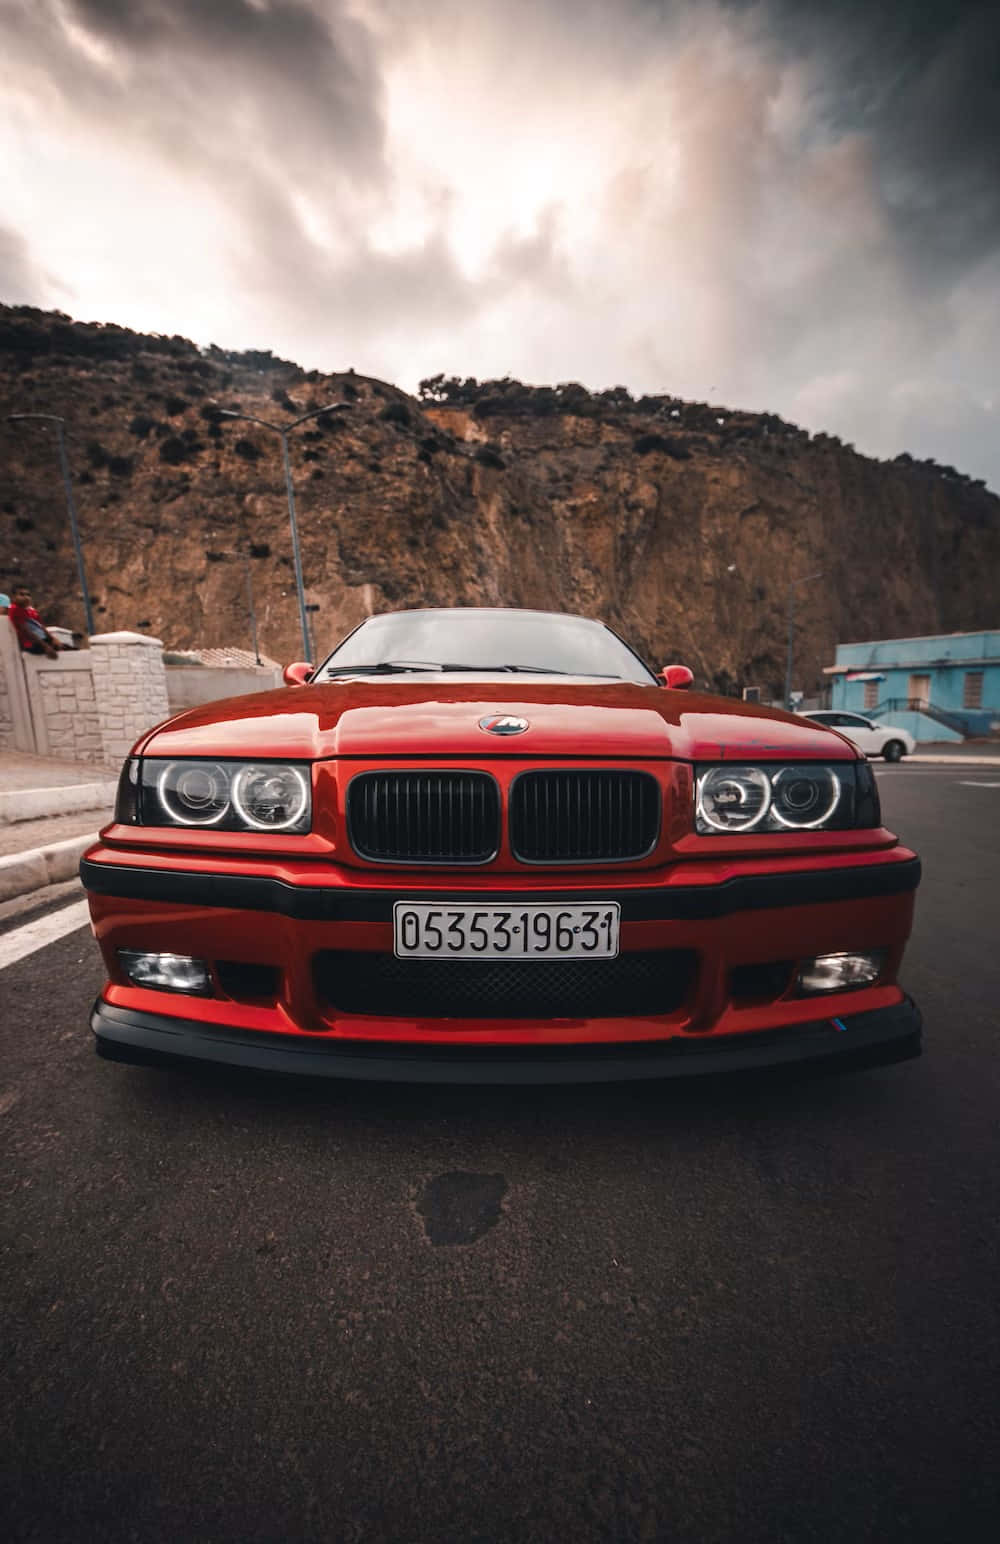 Red B M W E36 Front View Cloudy Sky Wallpaper